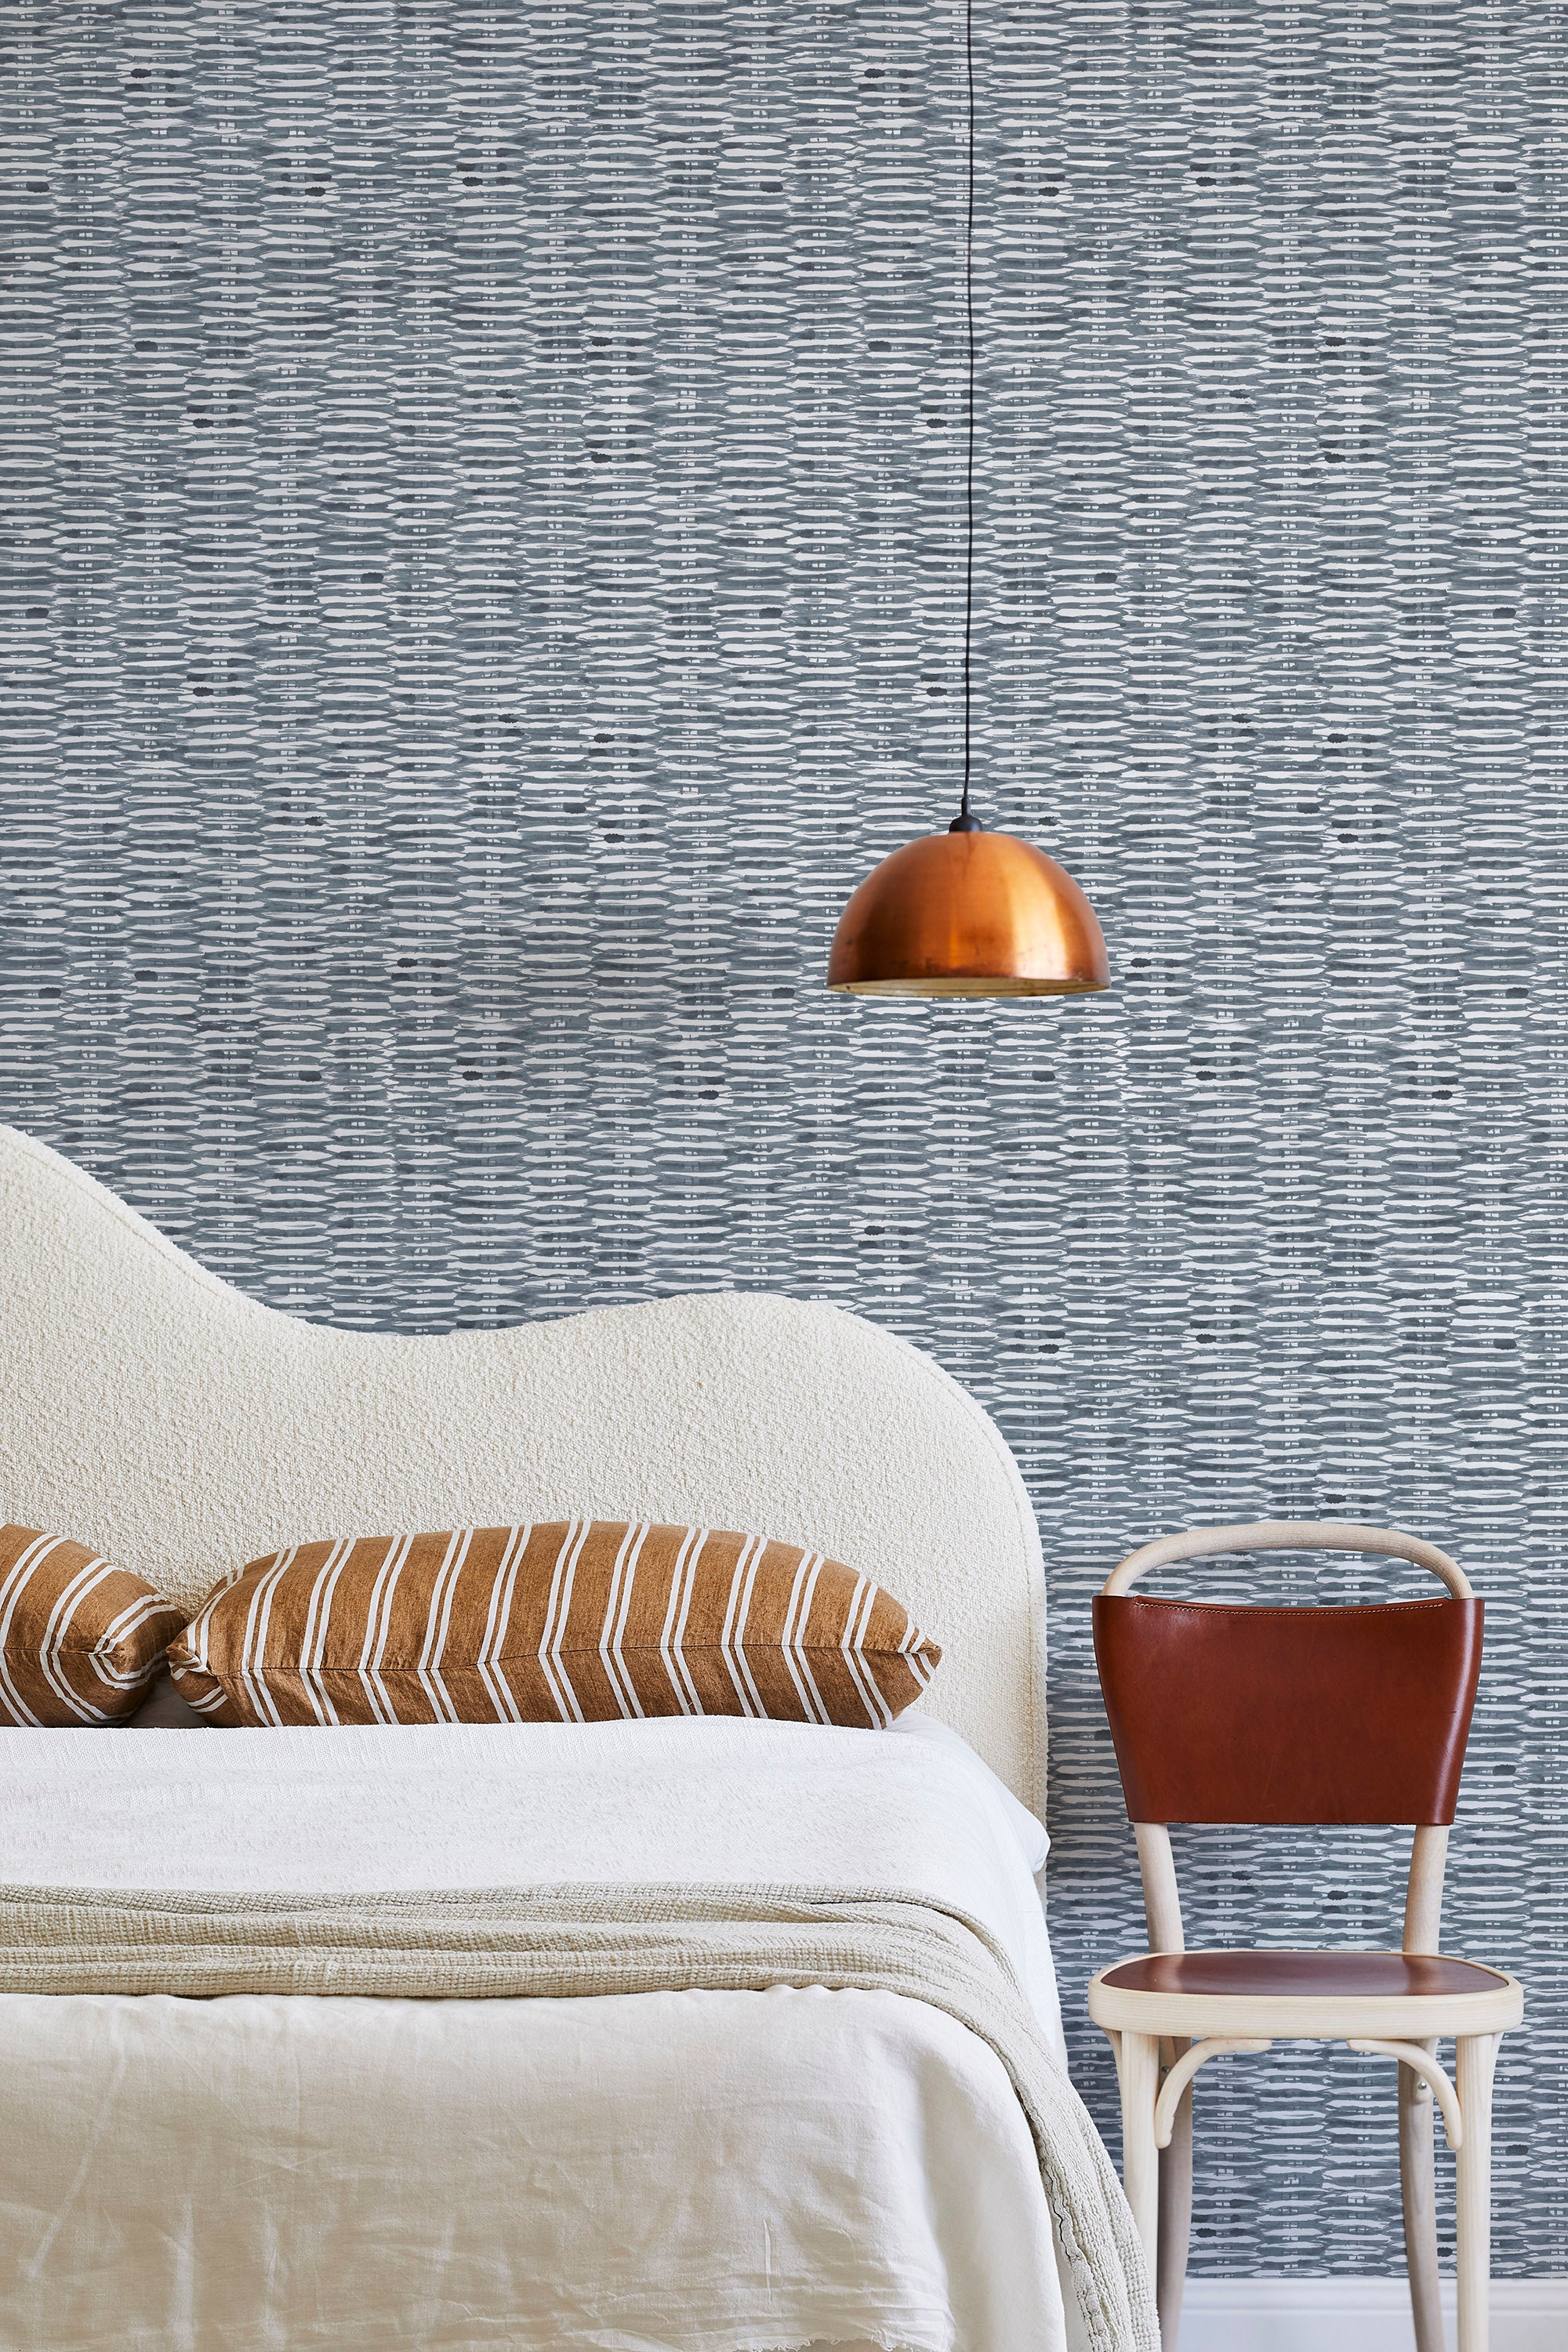 A modernist bed, hanging lamp and chair stand in front of a wall papered in a textural checked print in navy and white.